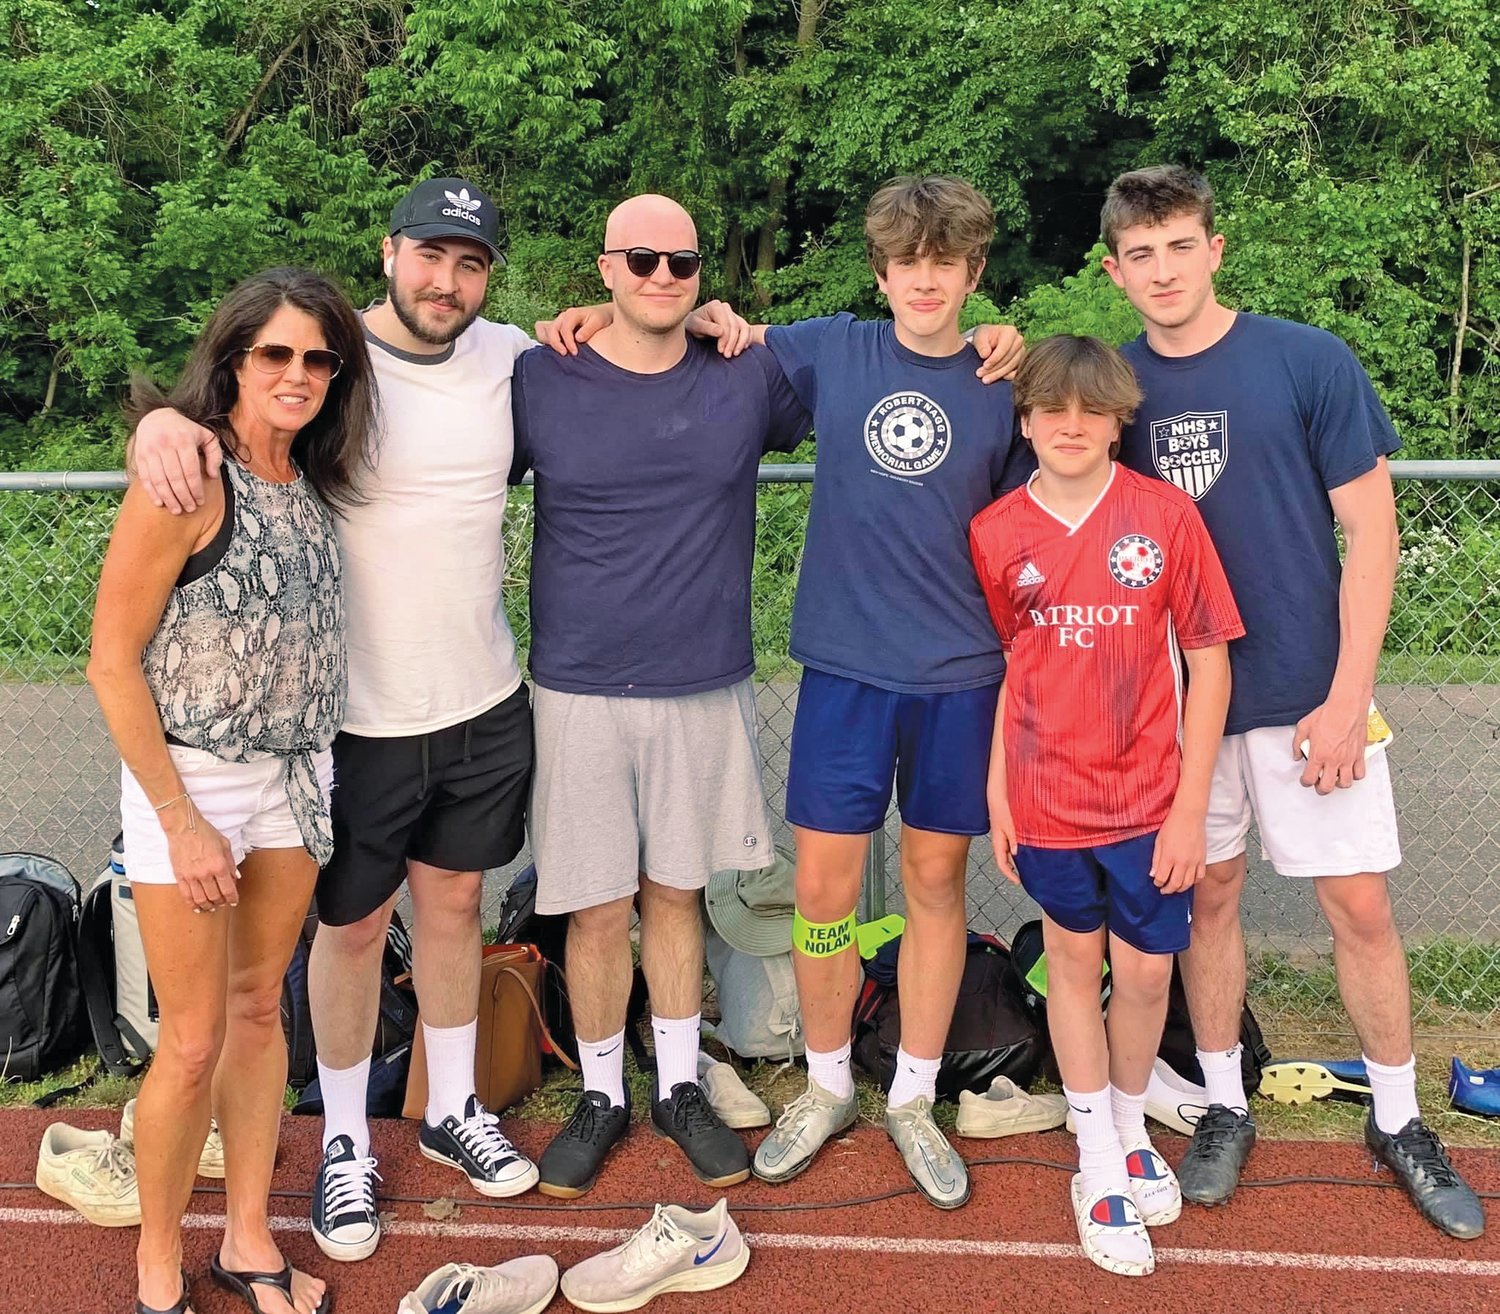 From left are: Nicole, Collin, Nolan, Declan, Brody and Liam Curran. Donations from this year’s Robert Nagg Memorial Soccer Game are going to support brain tumor research at the University of Pennsylvania in Nolan Curran’s name.